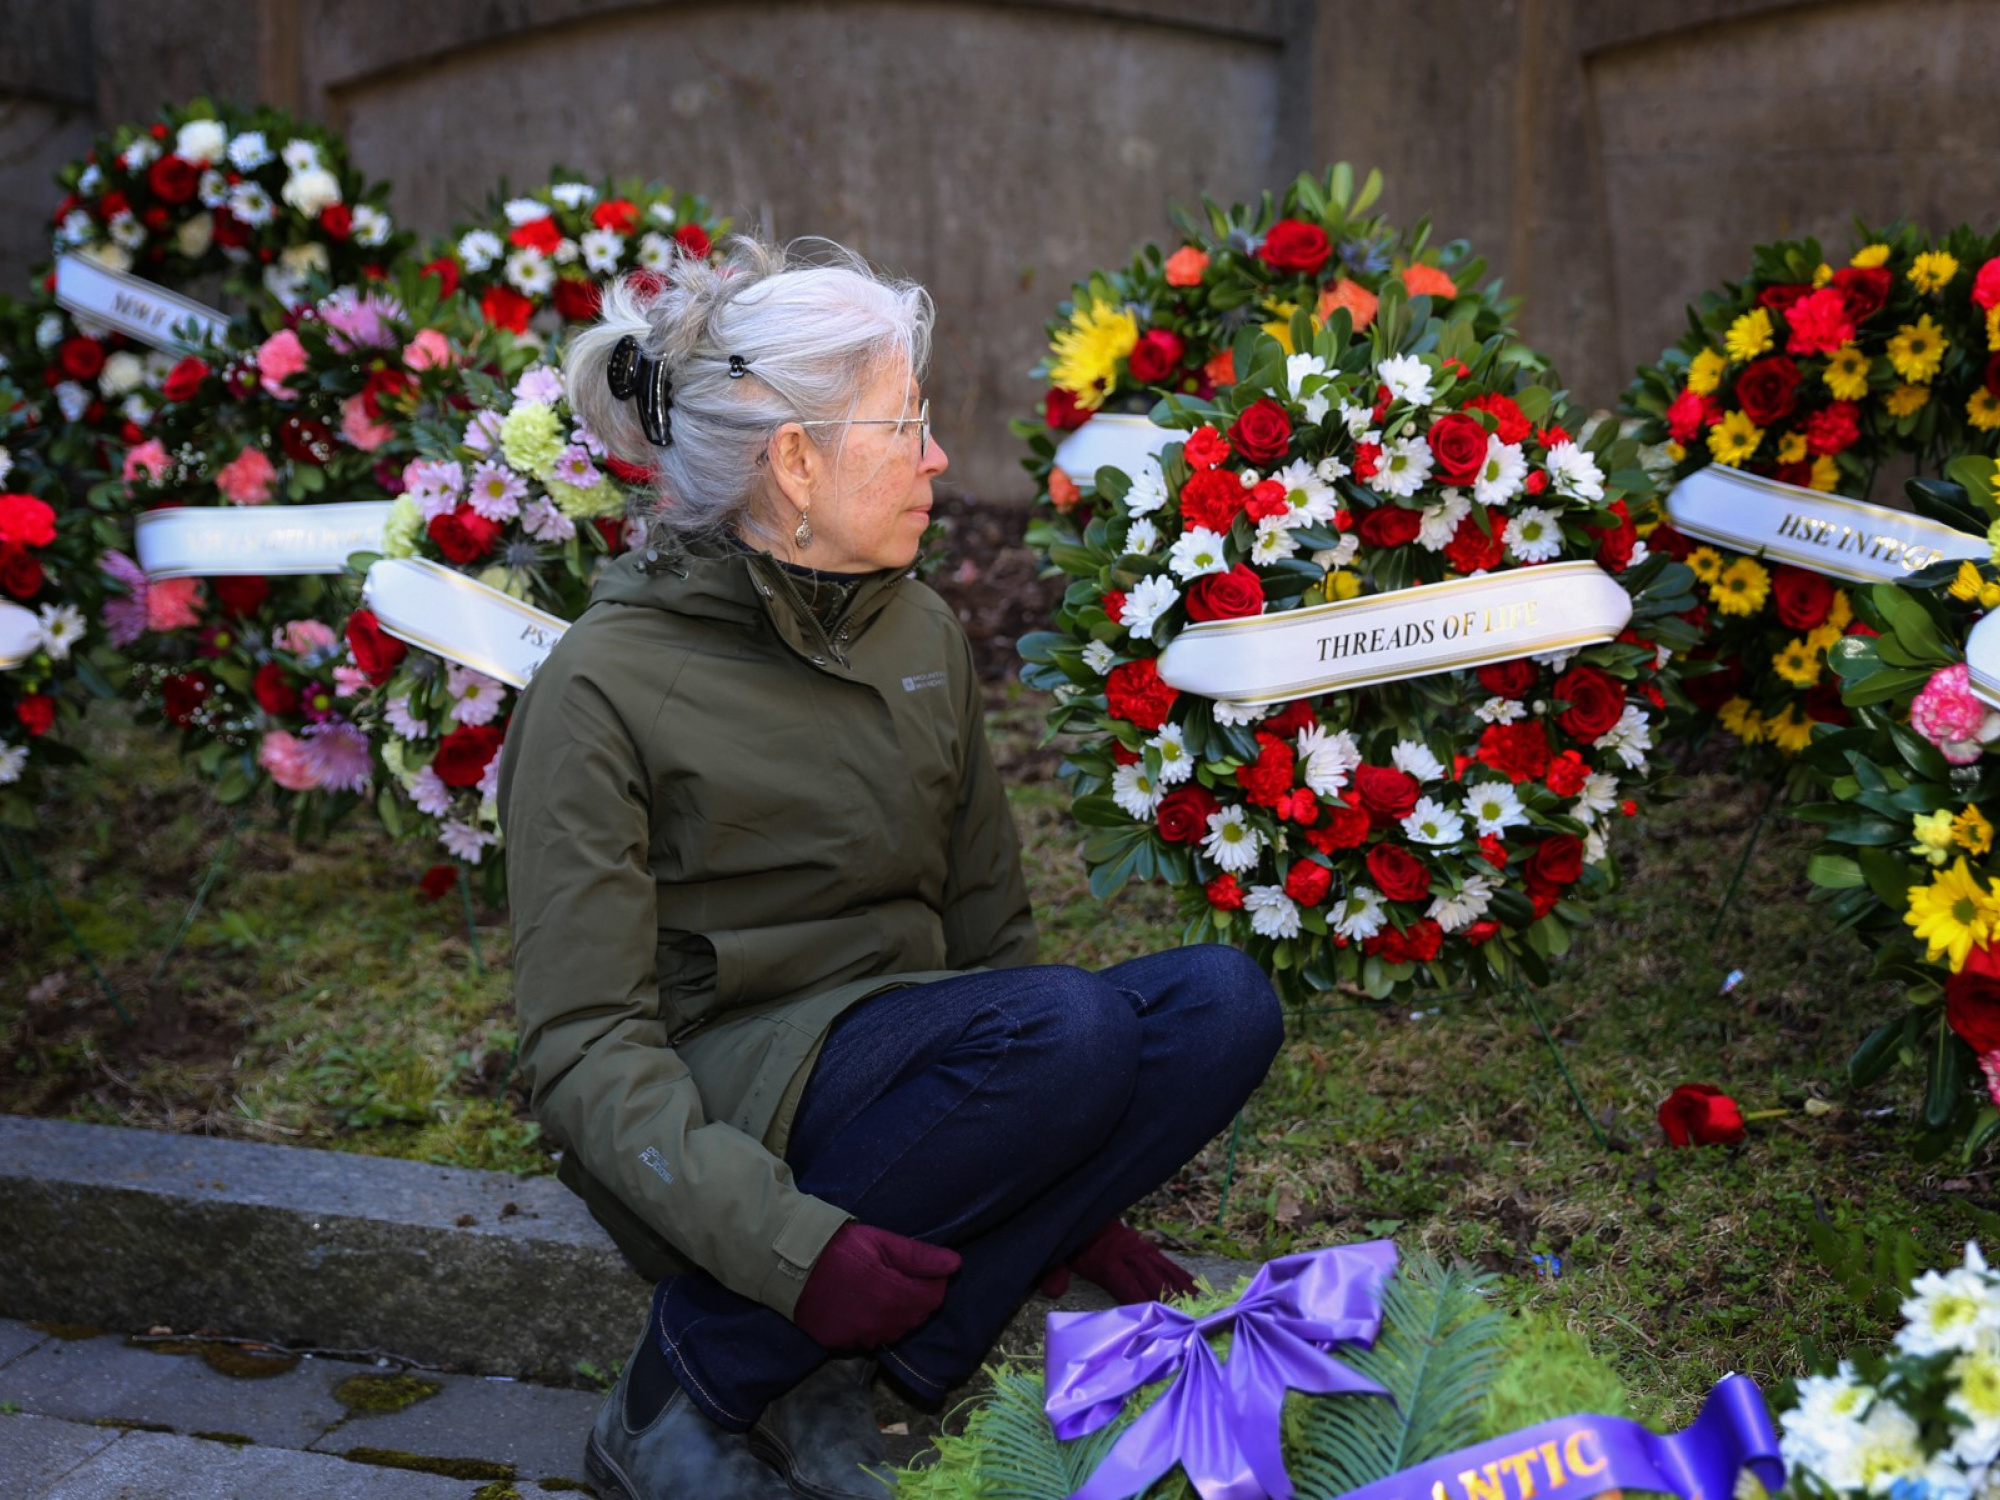 Candace Palumbo of Threads of Life, a support and advocacy organization, sits in front of wreaths placed outside Province House during the 2023 Day of Mourning ceremony. Her husband, Tony, died at age 59 from asbestos-related mesothelioma. (Communications Nova Scotia / File)